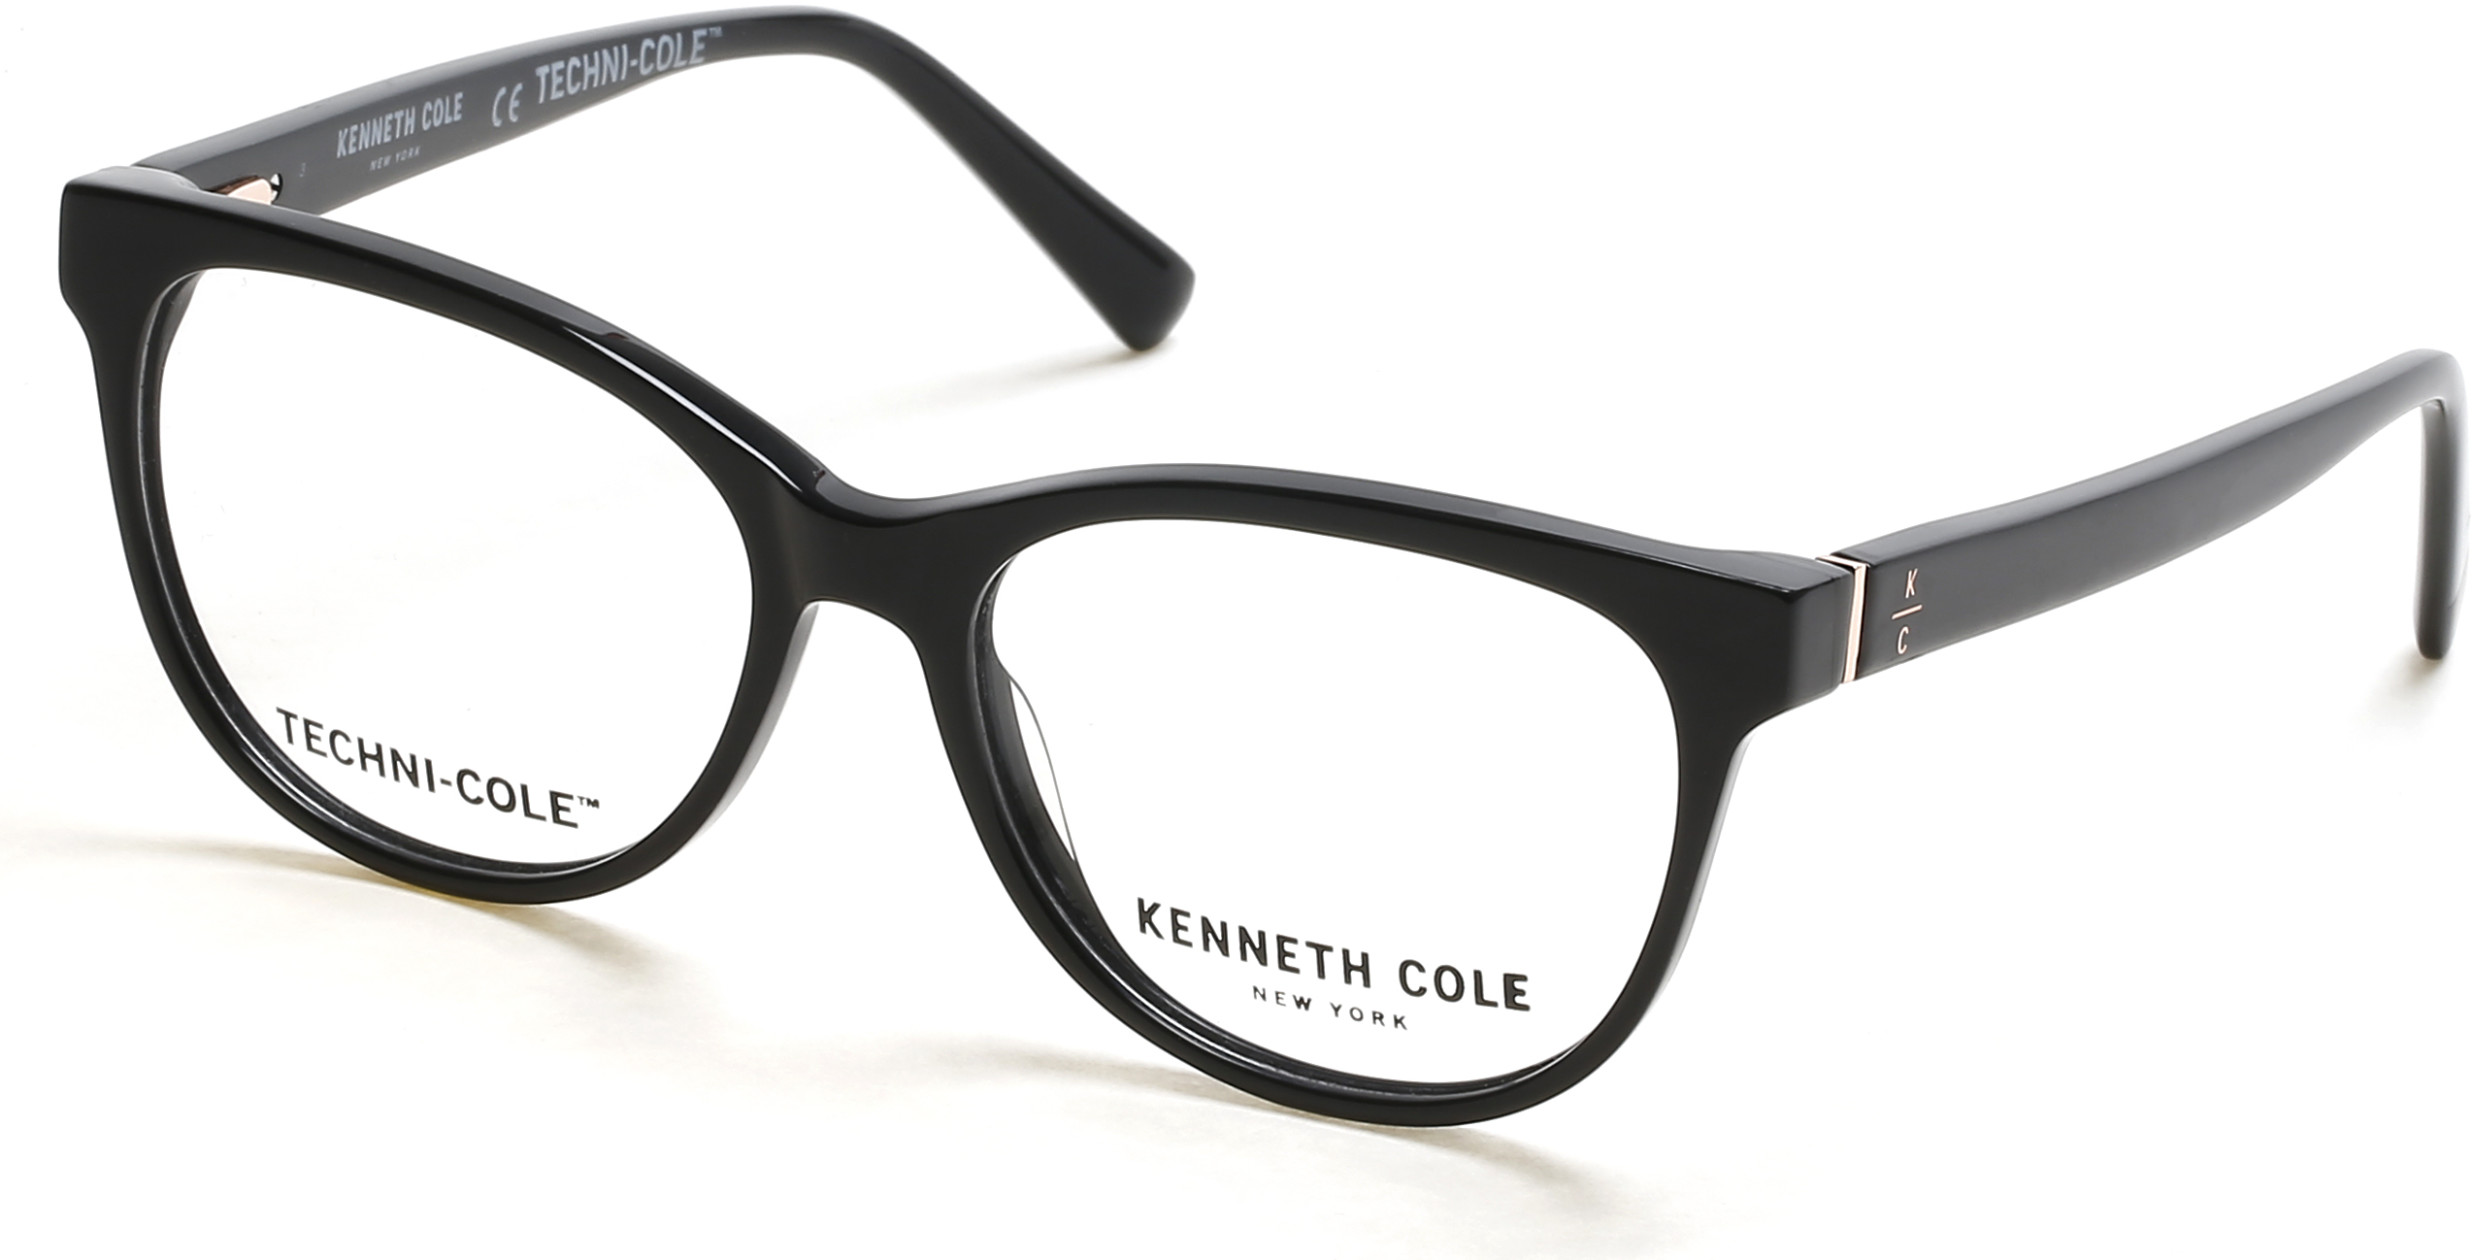 KENNETH COLE NY 0334